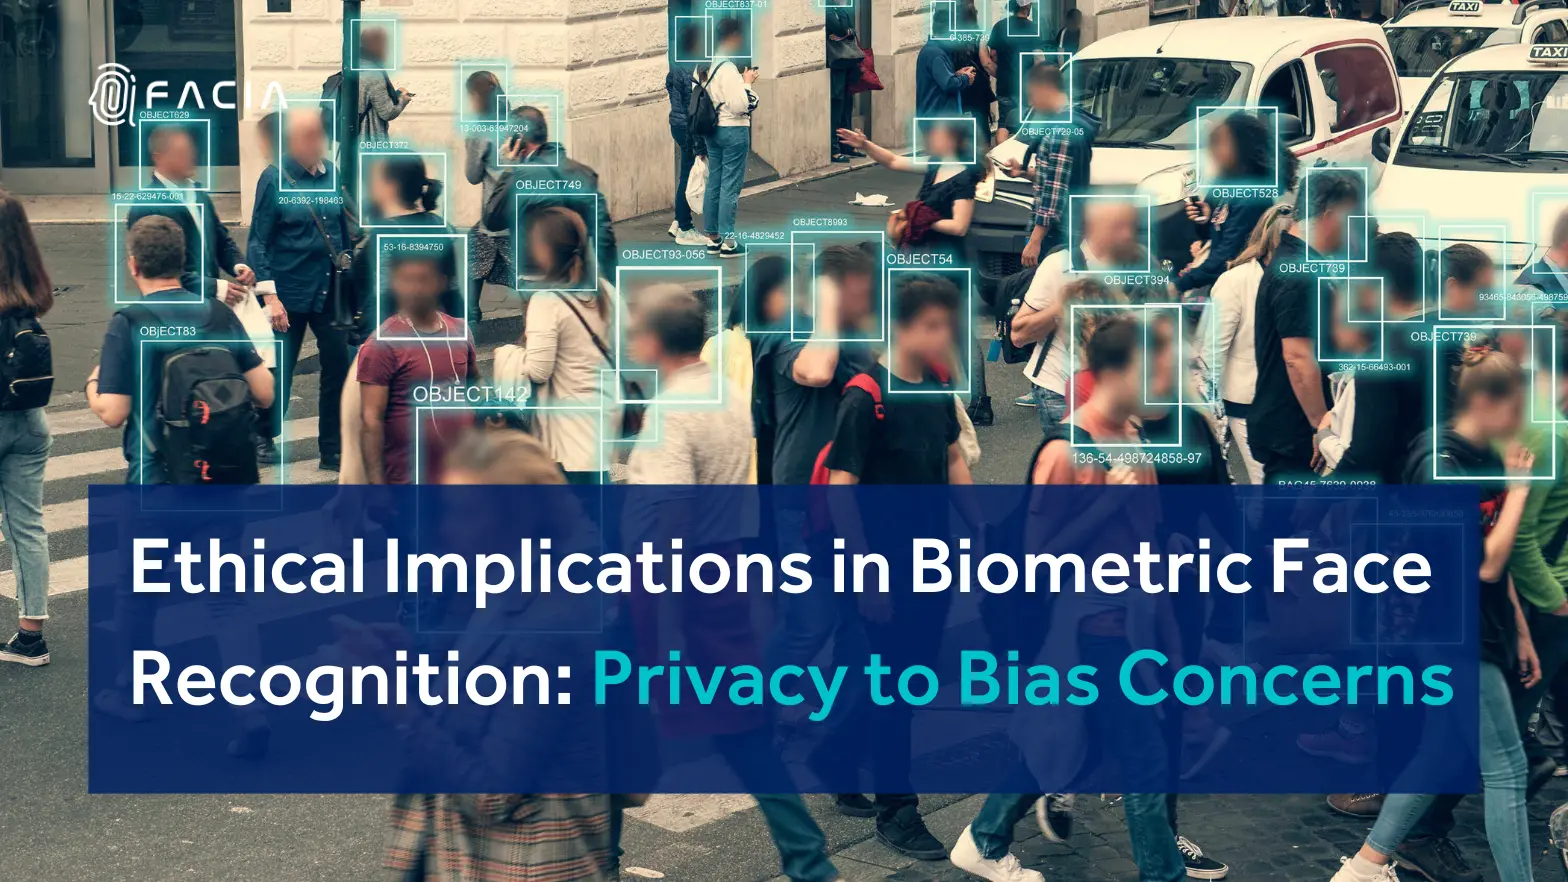 depiction of the ethical implications associated with biometric face recognition systems, highlighting concerns related to privacy, data security, and potential biases.